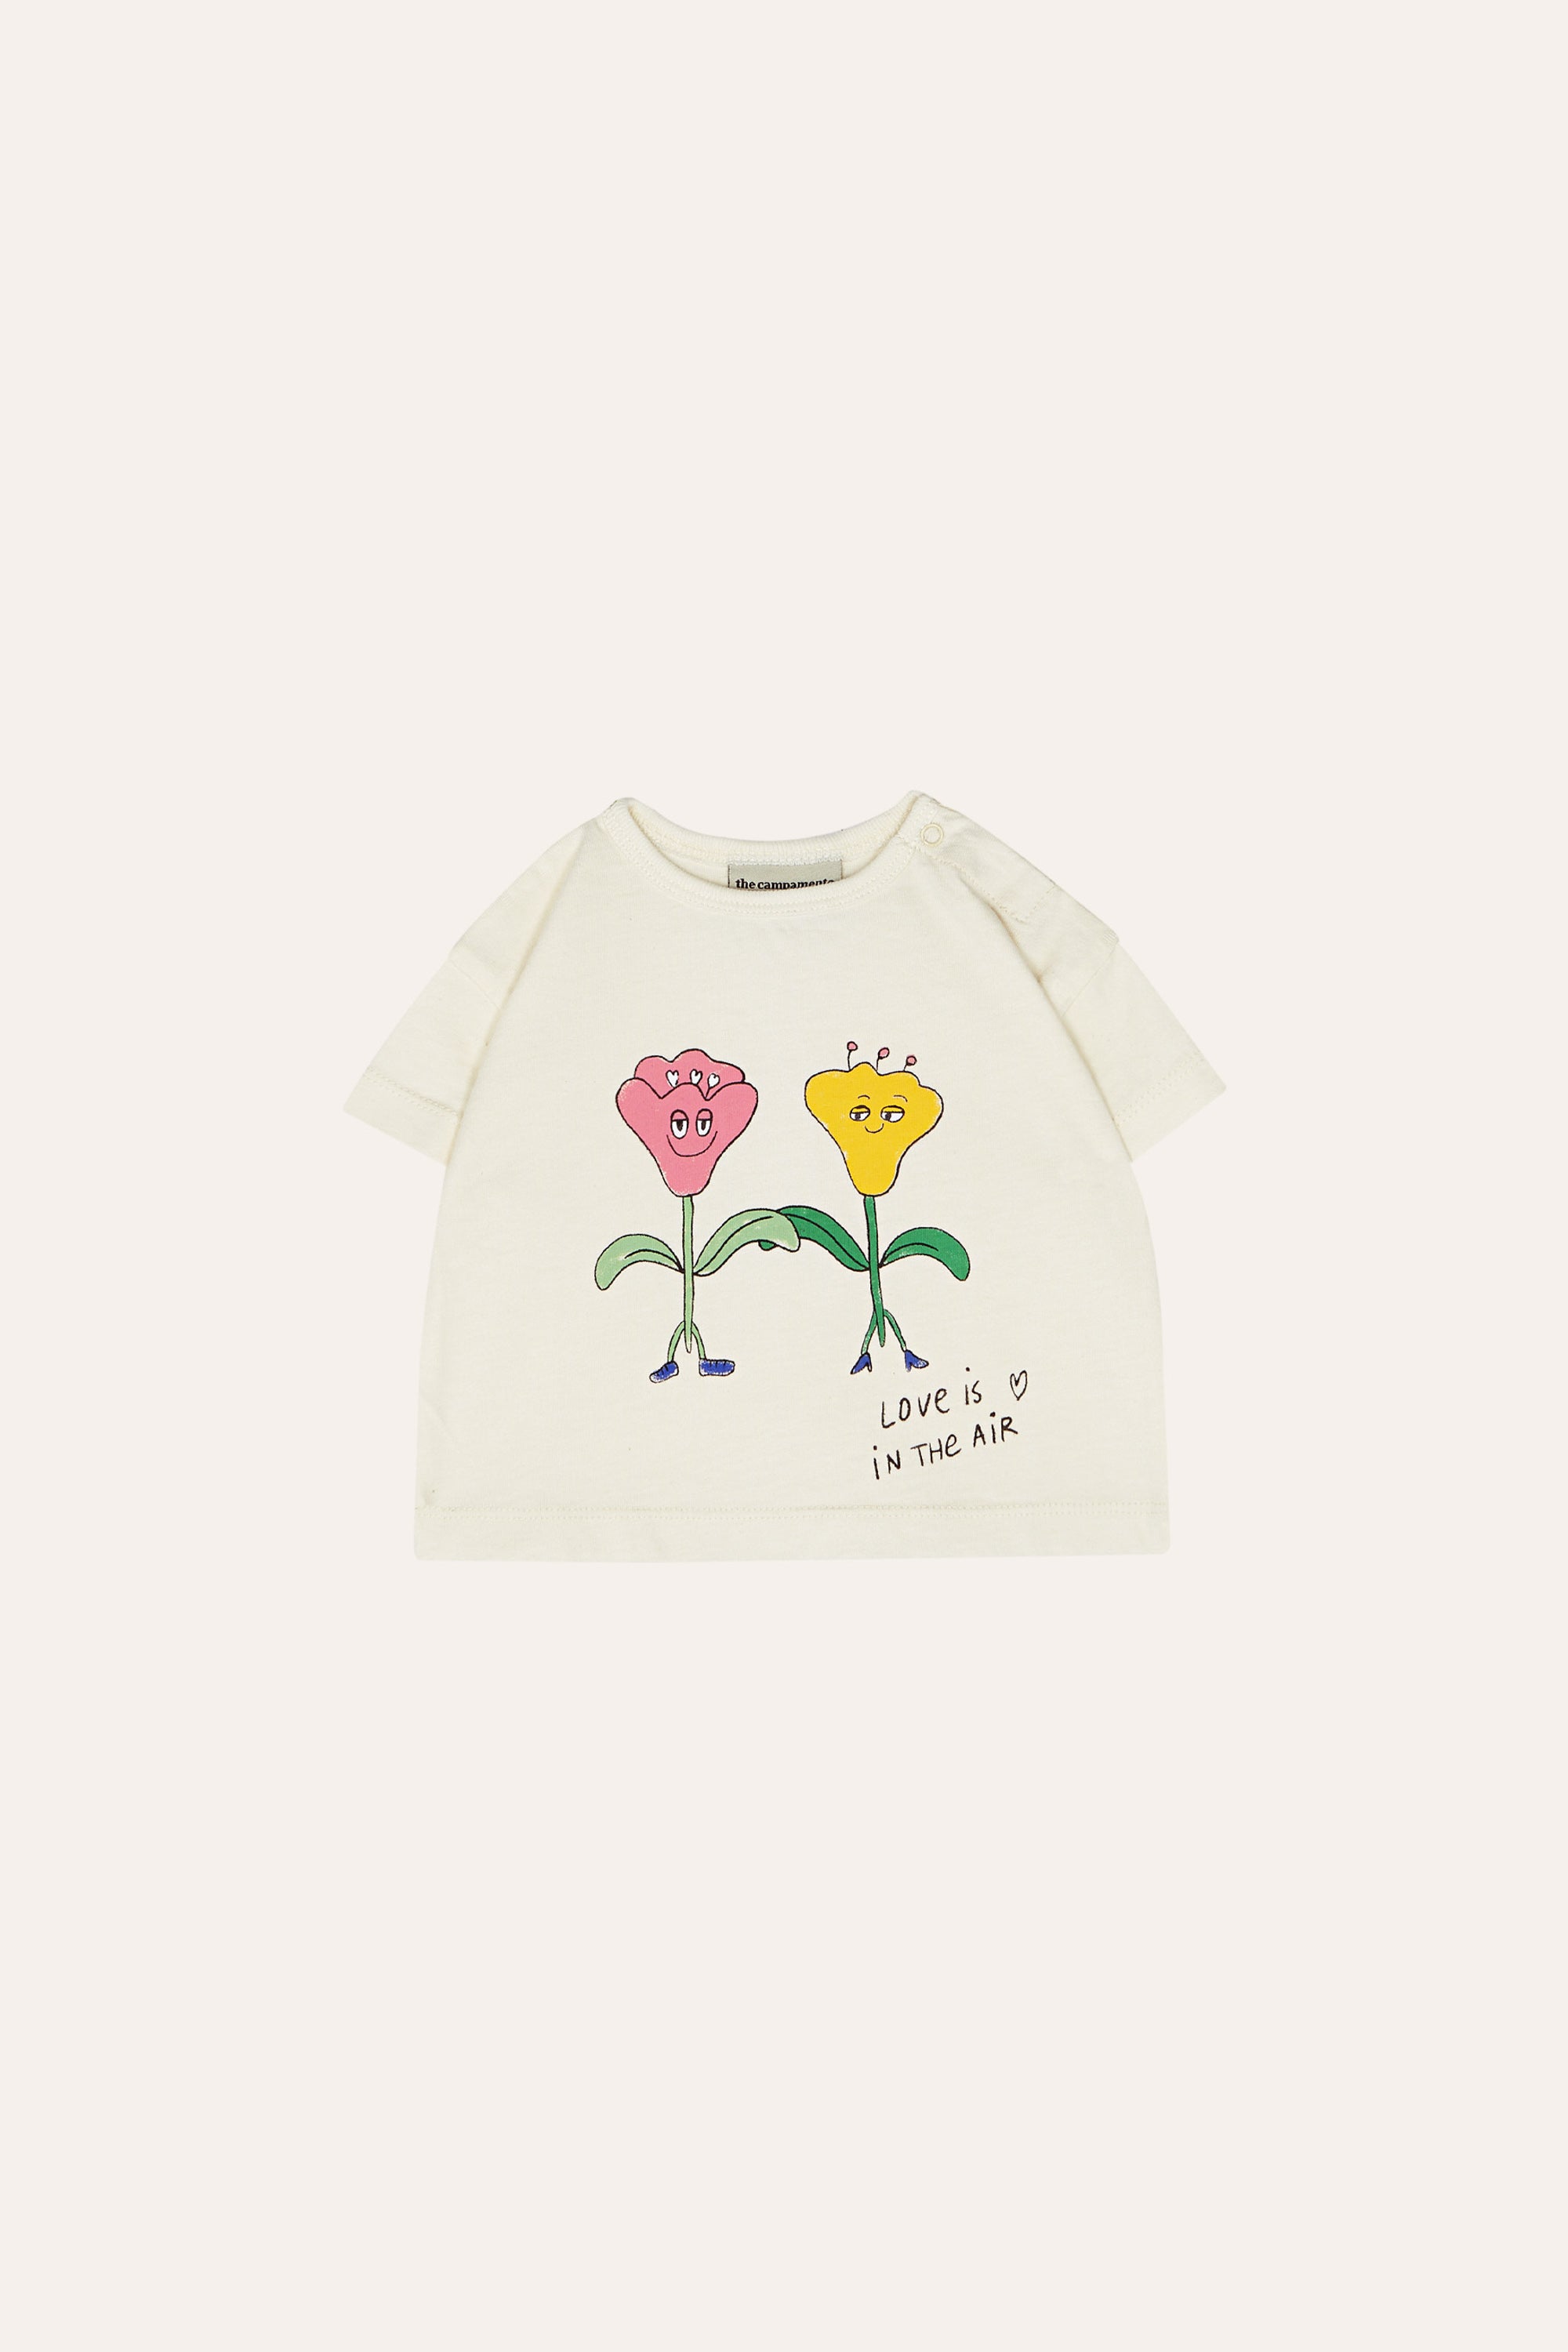 The Campamento - love is in the air baby t-shirt